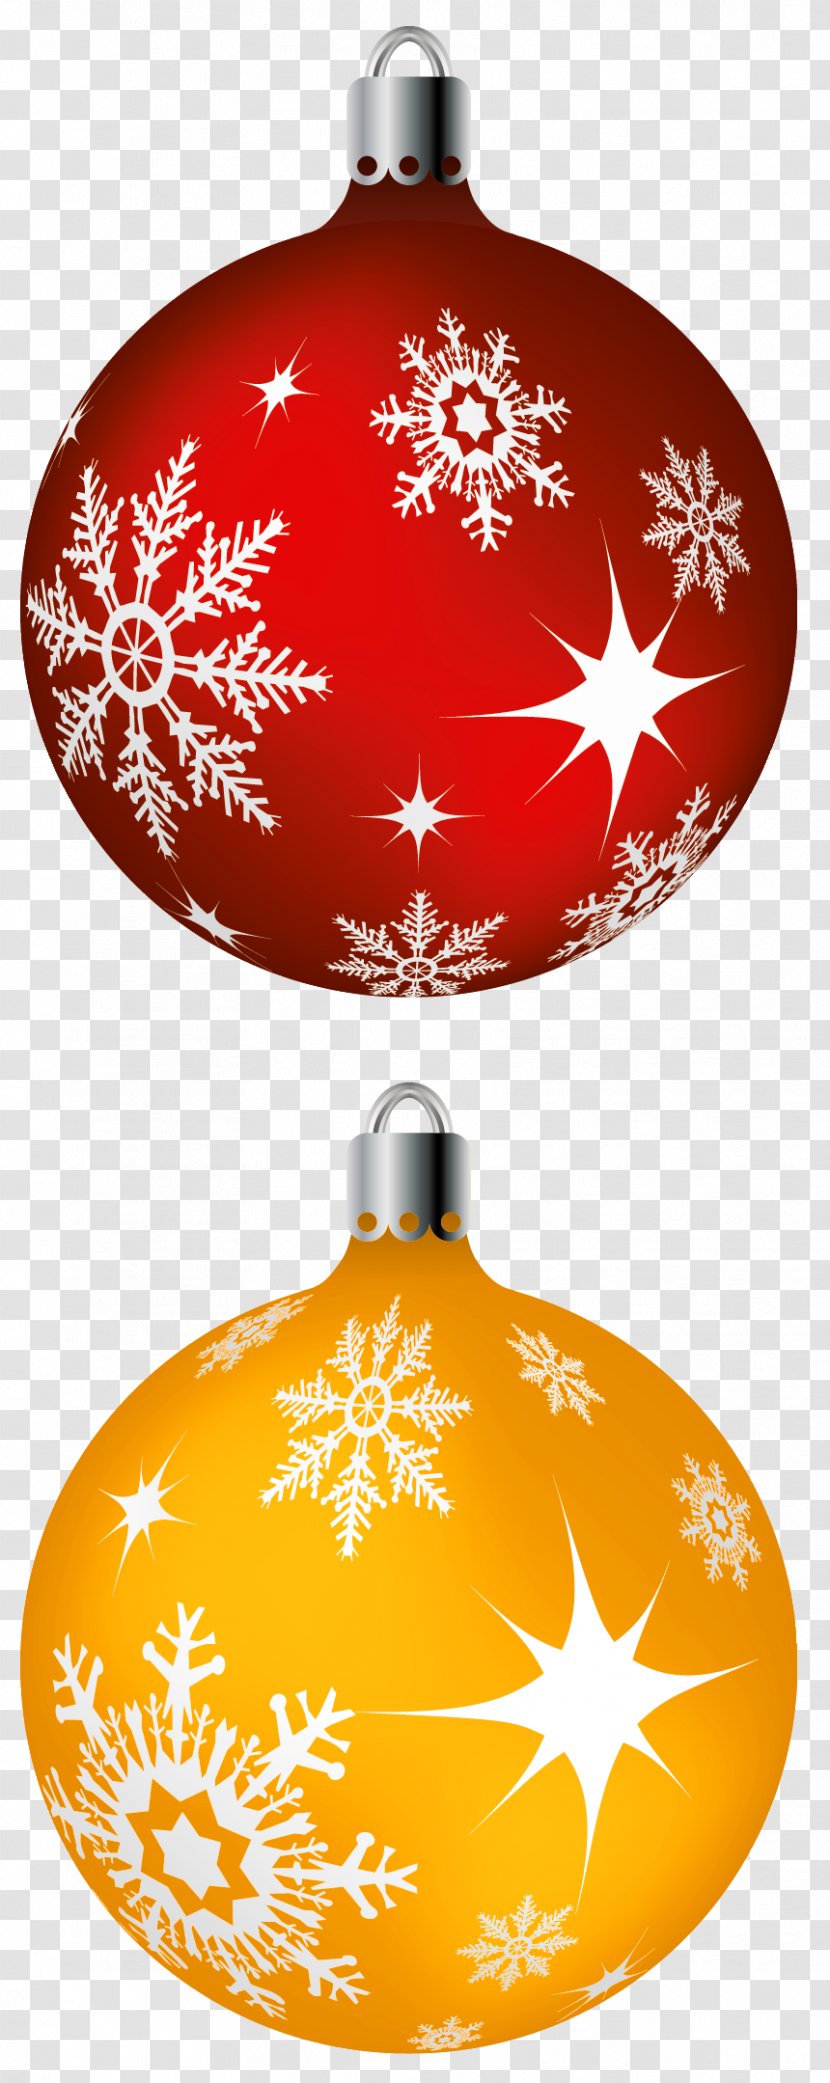 Christmas Ornament Decoration Santa Claus Clip Art - Ball - Red And Yellow Balls Clipart Picture Transparent PNG